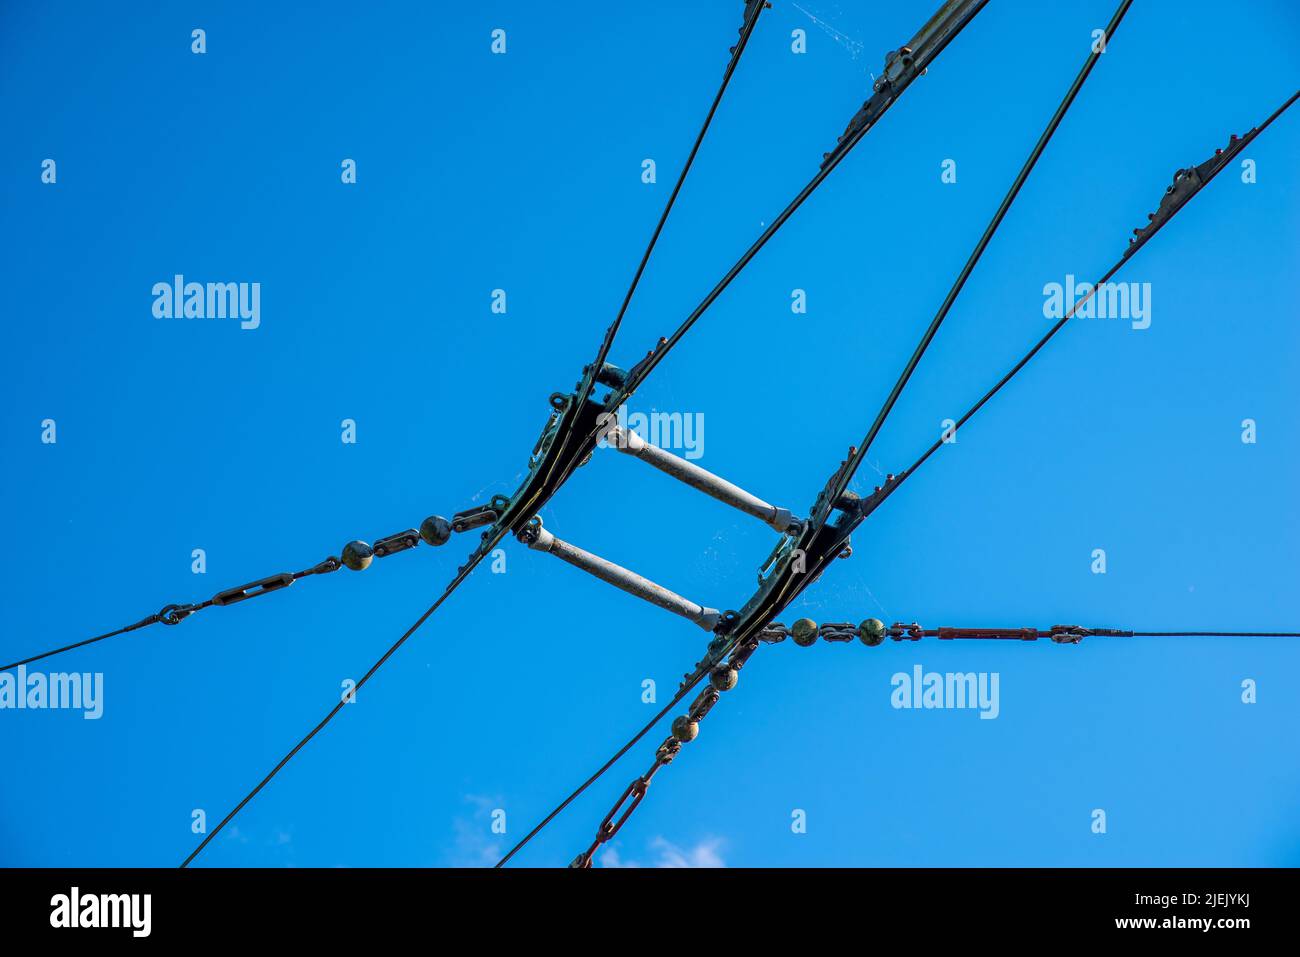 Overhead catenary and contact wires for an electric trolley bus system with a plain blue sky background. Stock Photo